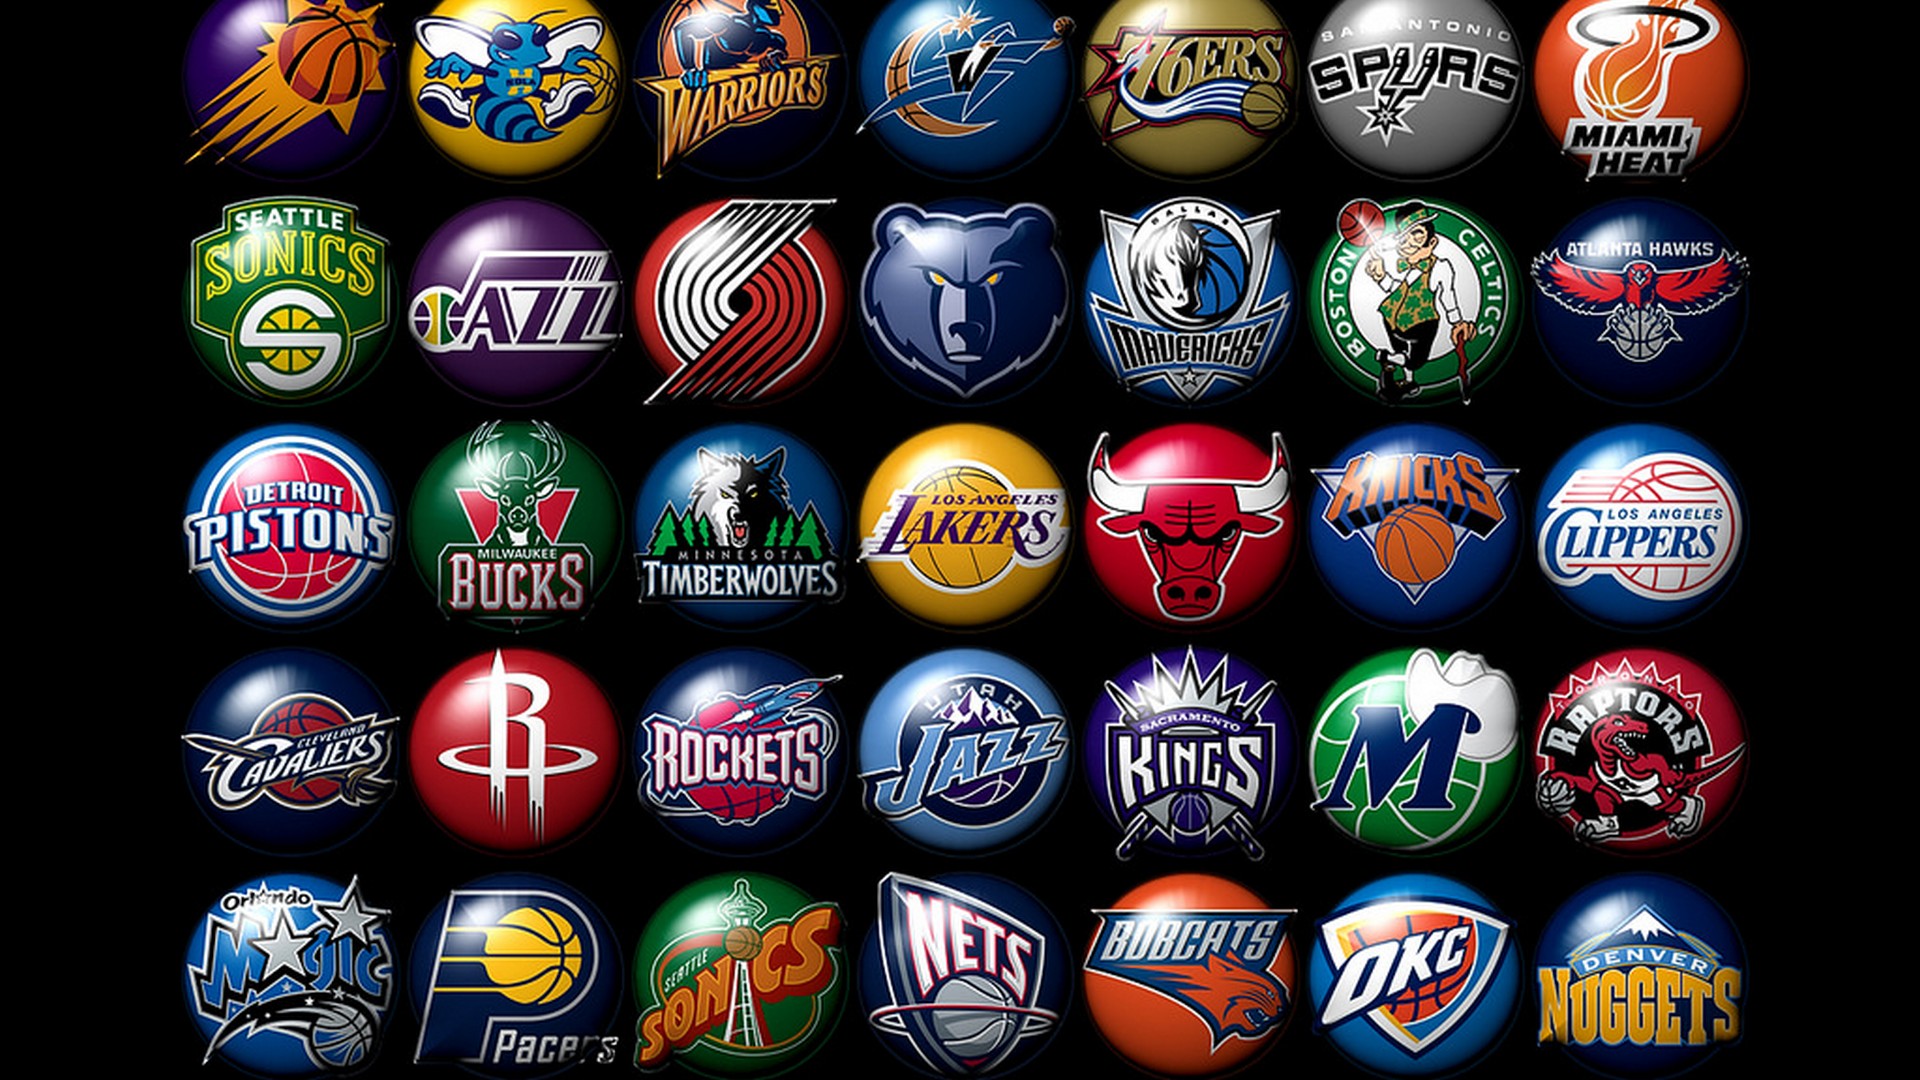 NBA HD Wallpapers with image dimensions 1920x1080 pixel. You can make this wallpaper for your Desktop Computer Backgrounds, Windows or Mac Screensavers, iPhone Lock screen, Tablet or Android and another Mobile Phone device